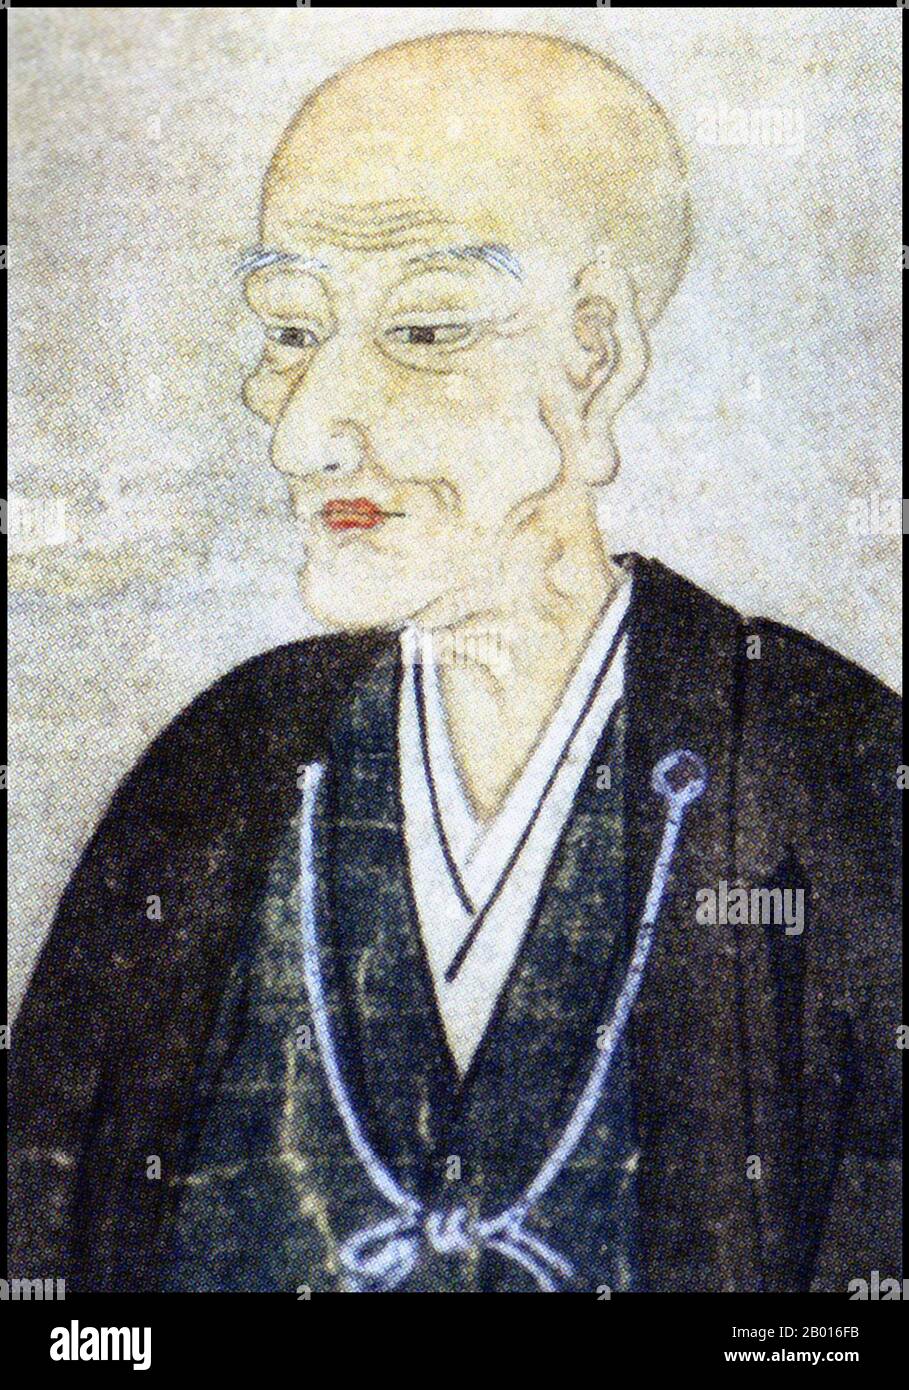 Japan: Matsudaira Harusato (1751-1818), Daimyo of Matsue Domain (r.1767-1806). Hanging scroll painting, early 19th century.  Matsudaira Harusato, also known by Matsudaira Fumai, was a Japanese daimyo of the Edo period. By the time he succeeded his father as lord, Matsue had been reduced to a state of poverty, something he set about reversing quickly. His reforms were swiftly accomplished and production of the fief's major products increased.  Matsudaira was an advocate of chanoyu, the Japanese tea ceremony, and wrote treatises about it. He became a tea master under the name Fumai. Stock Photo